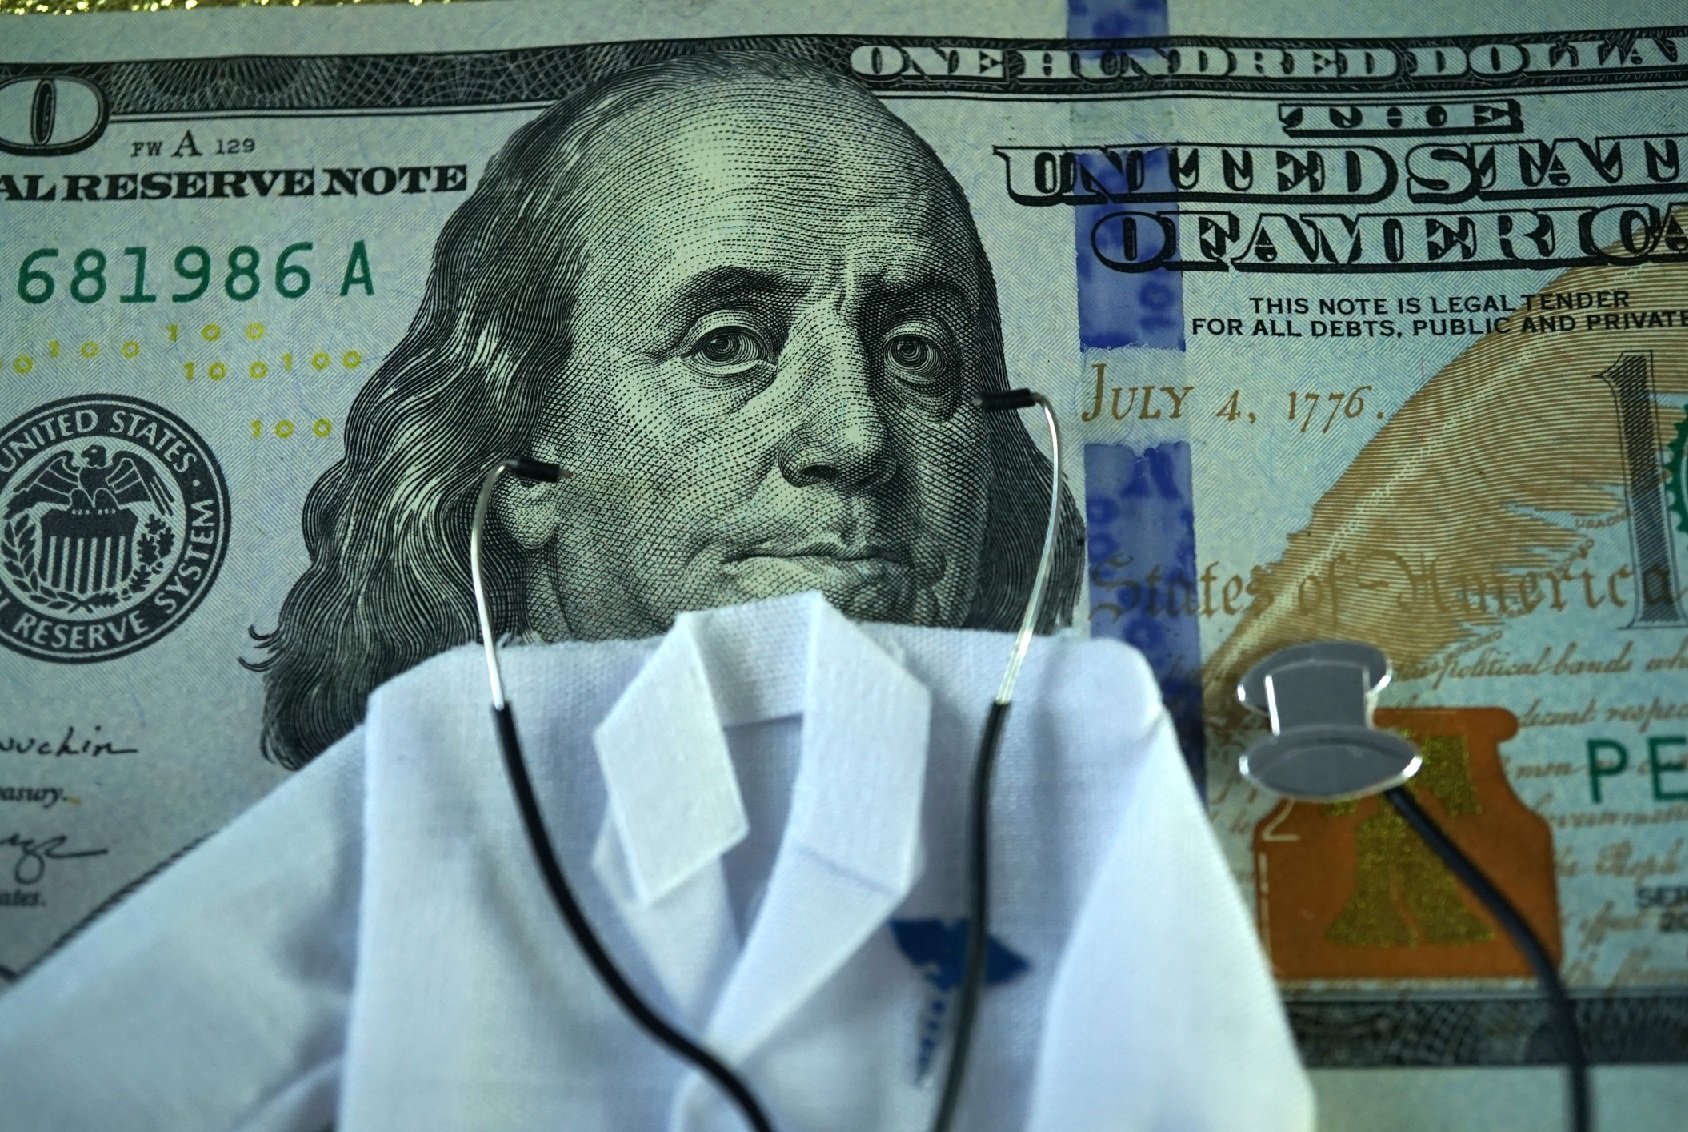 Doctor jacket and stethoscope placed in front of money